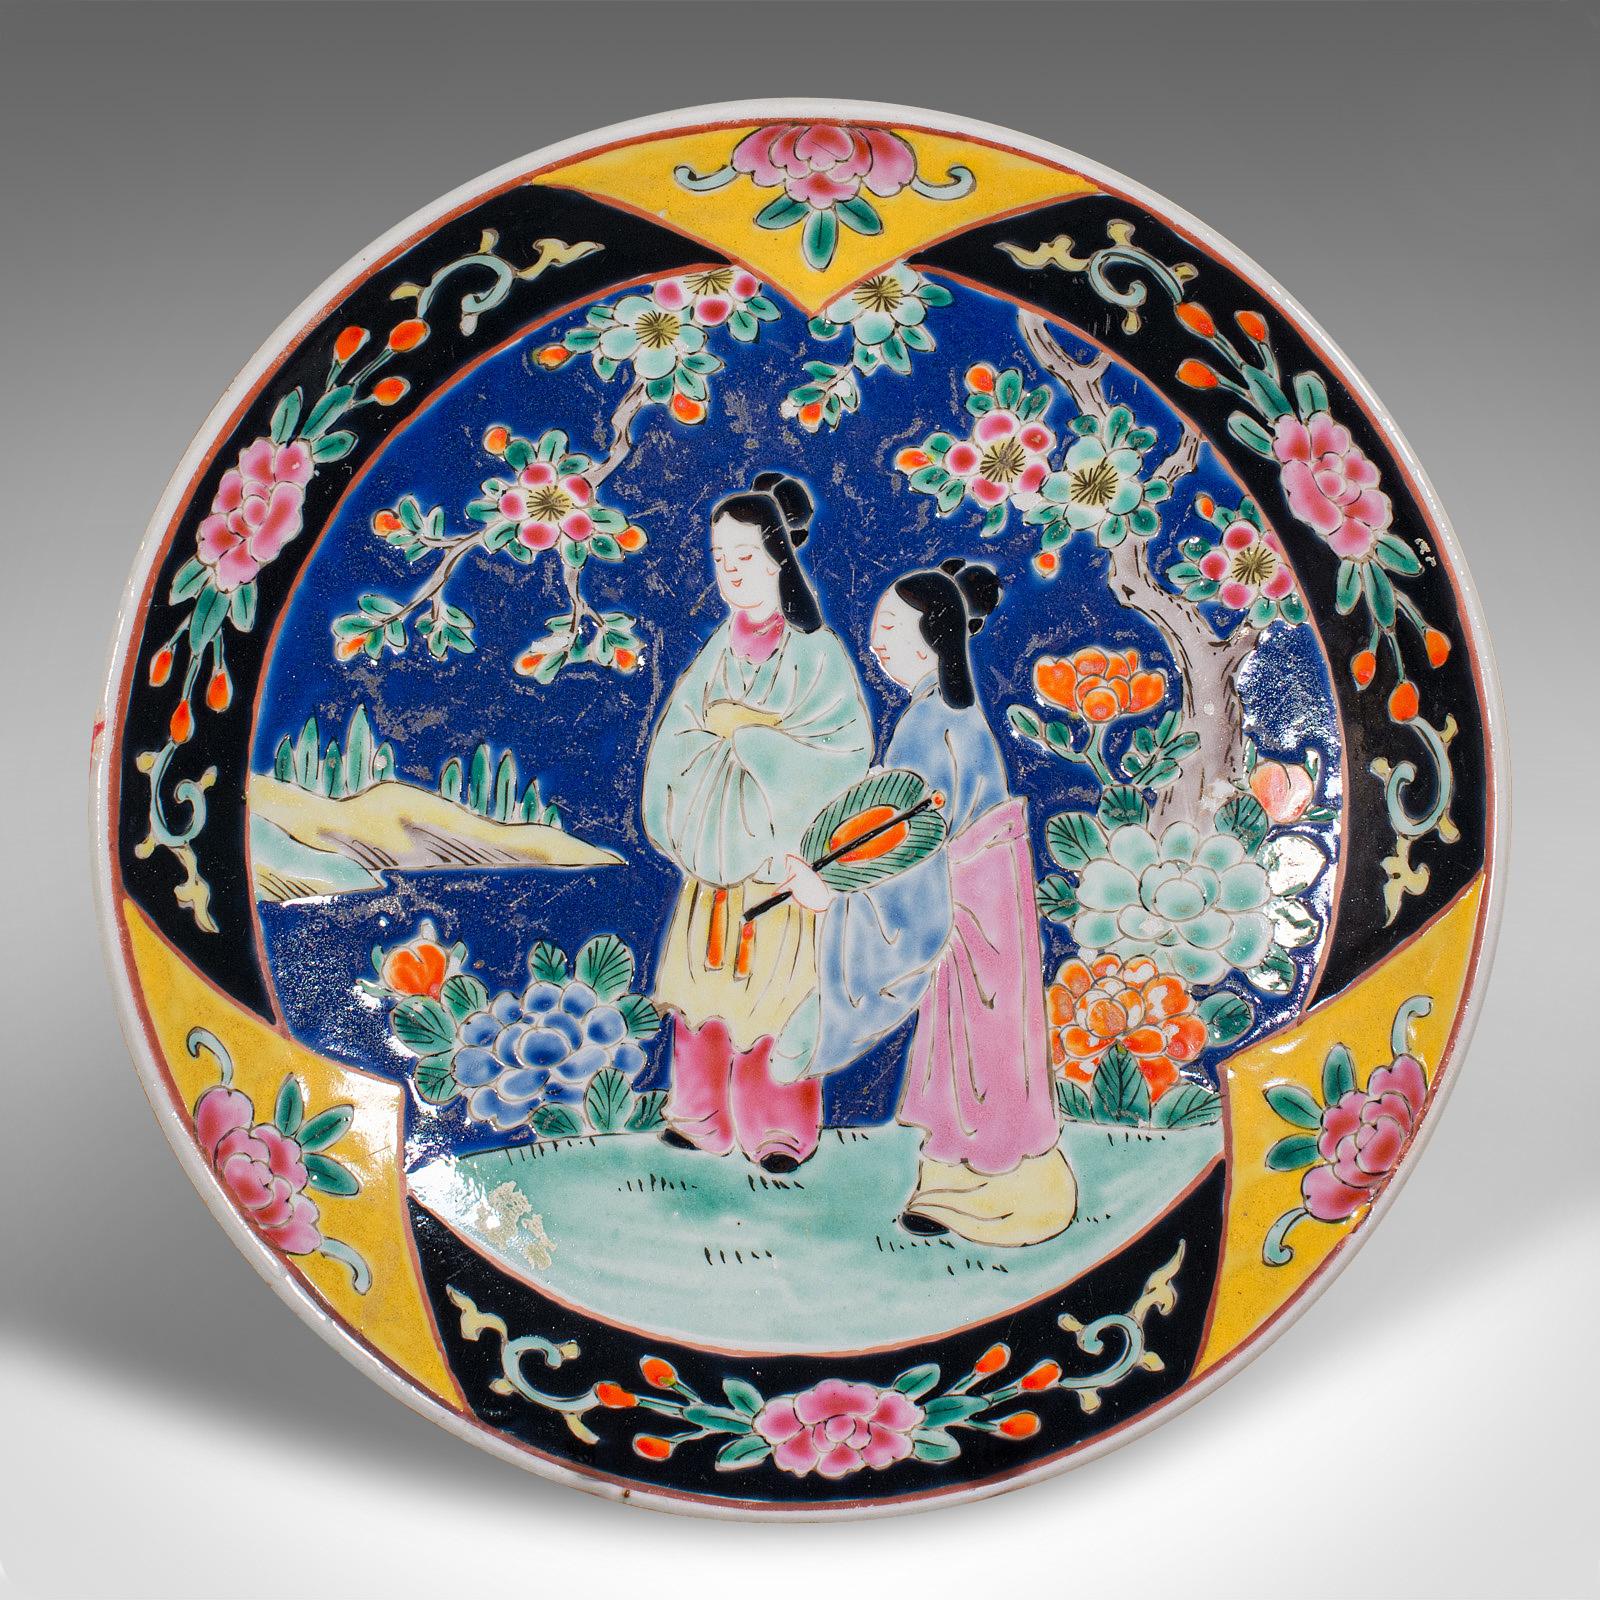 This is an antique decorative plate. A Chinese, ceramic display charger, dating to the late Victorian period, circa 1900.

Colourful Qing dynasty display plate, with appealing decor
Displays a desirable aged patina and in good order
Quality white